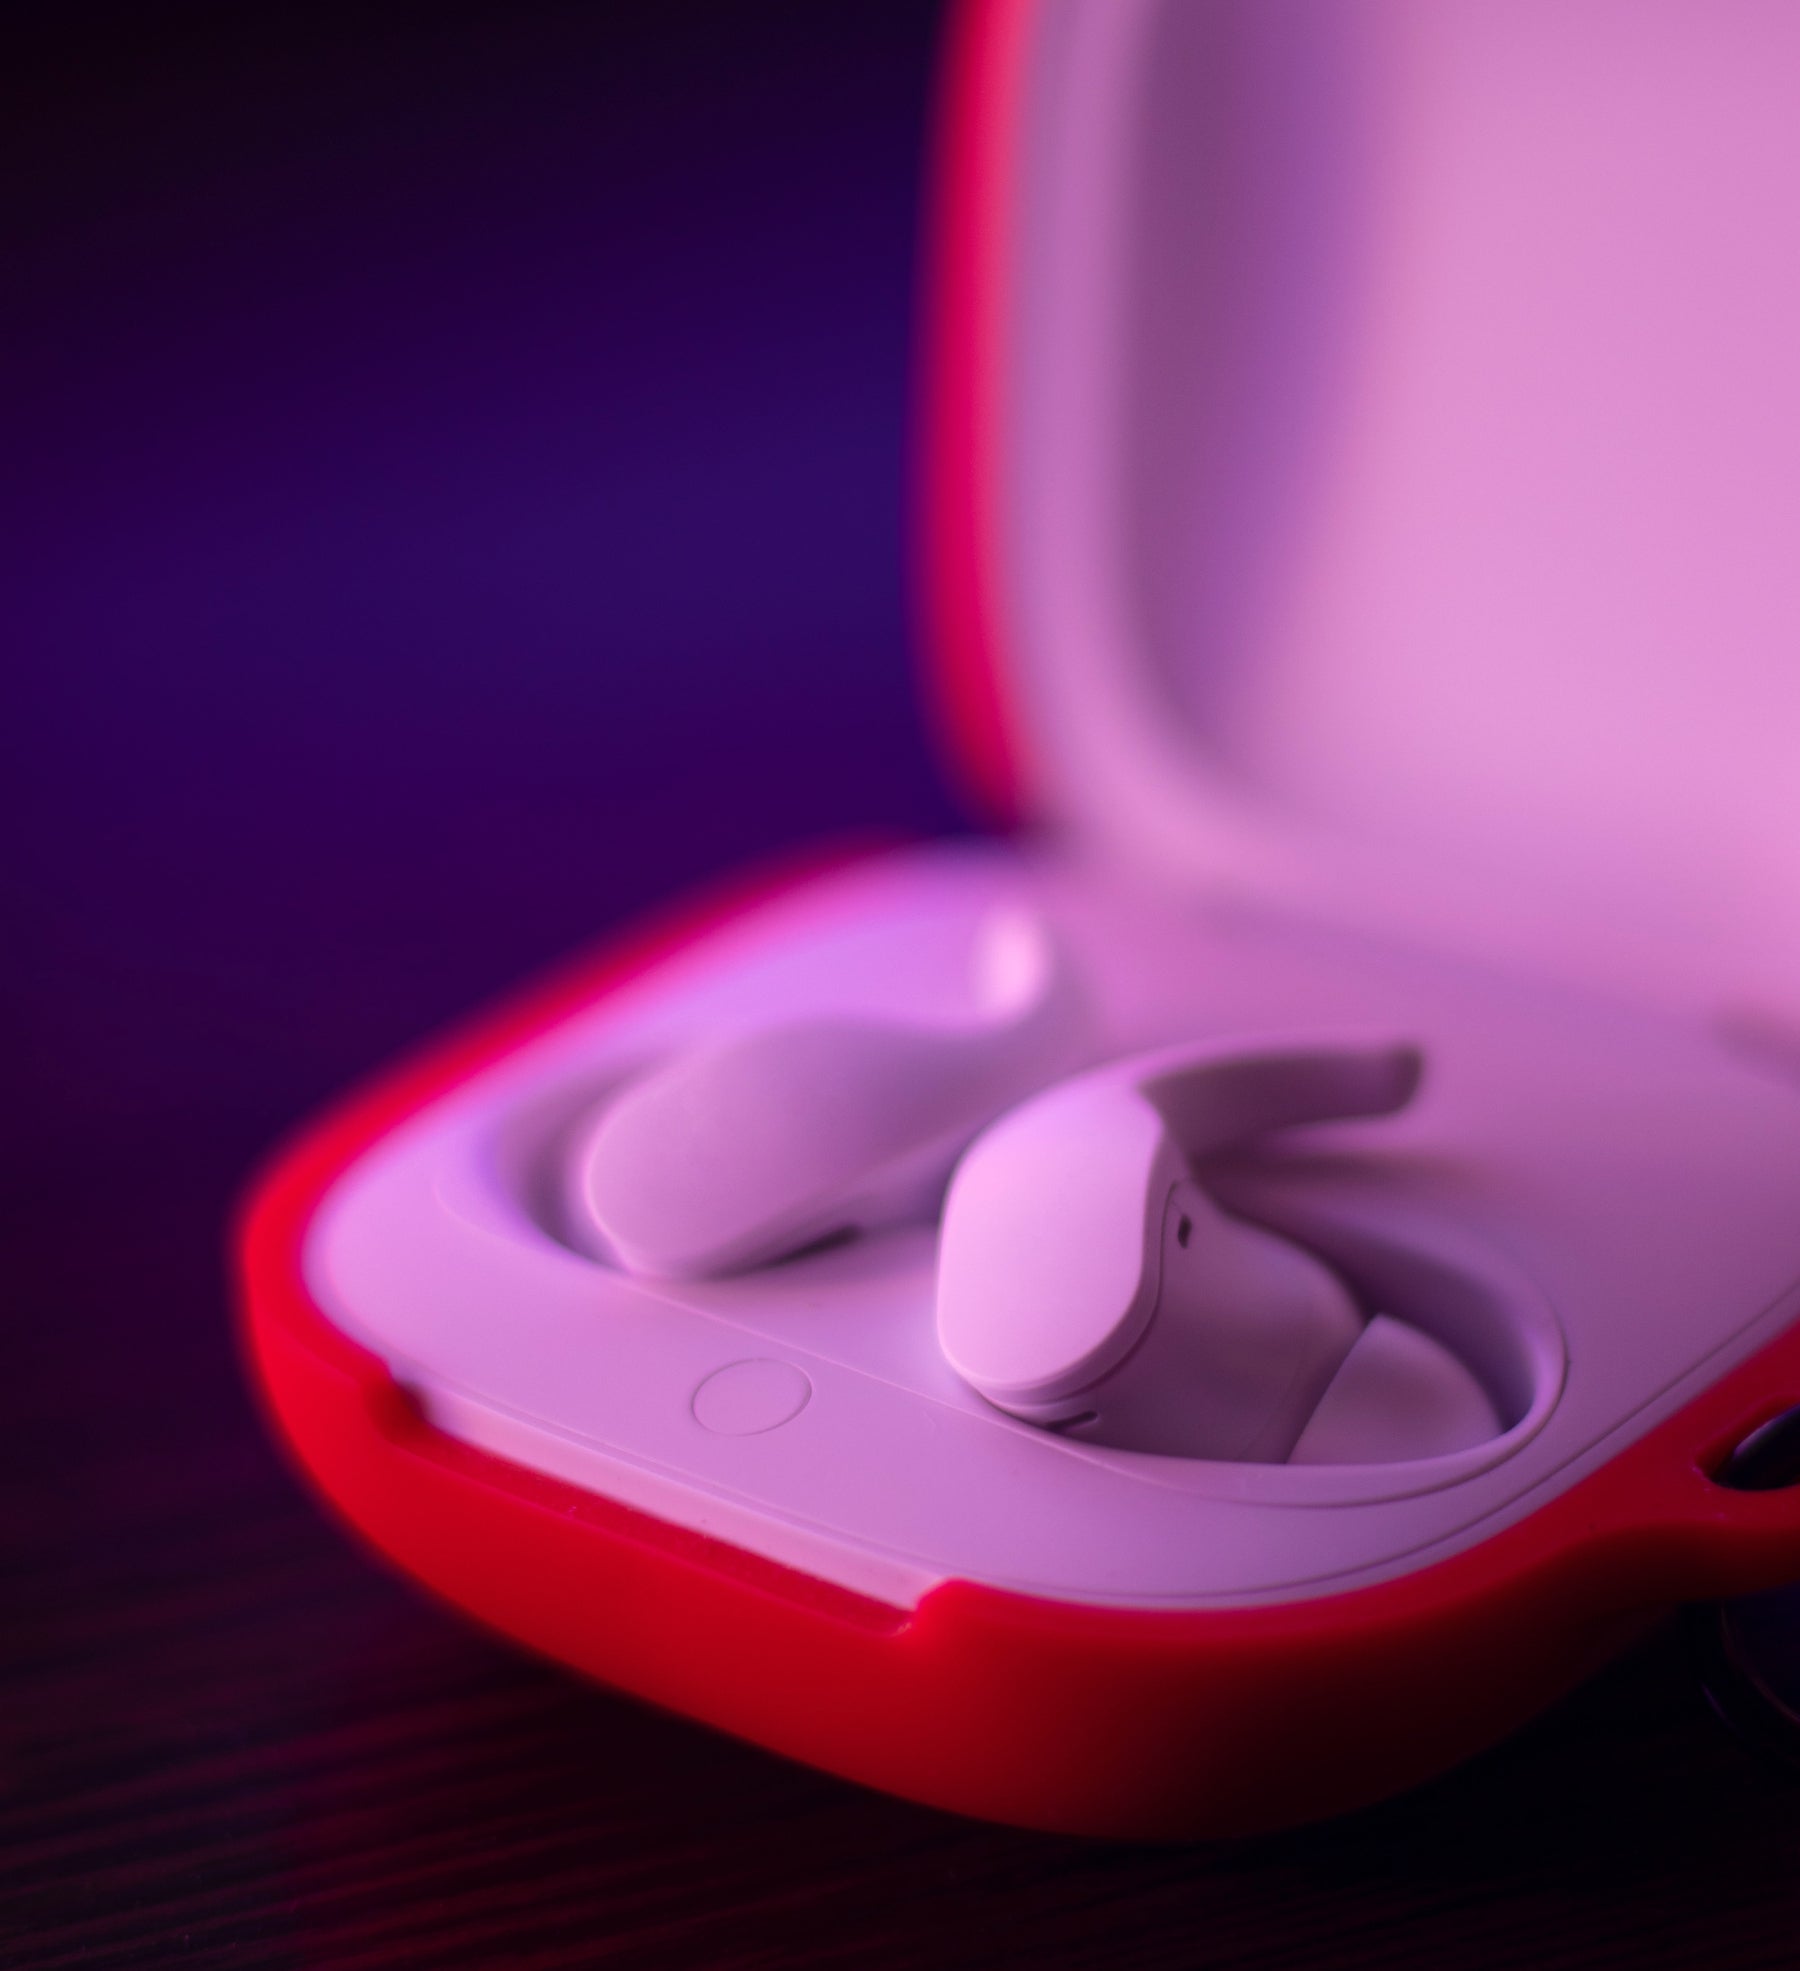 Two earbuds in an open red and white box